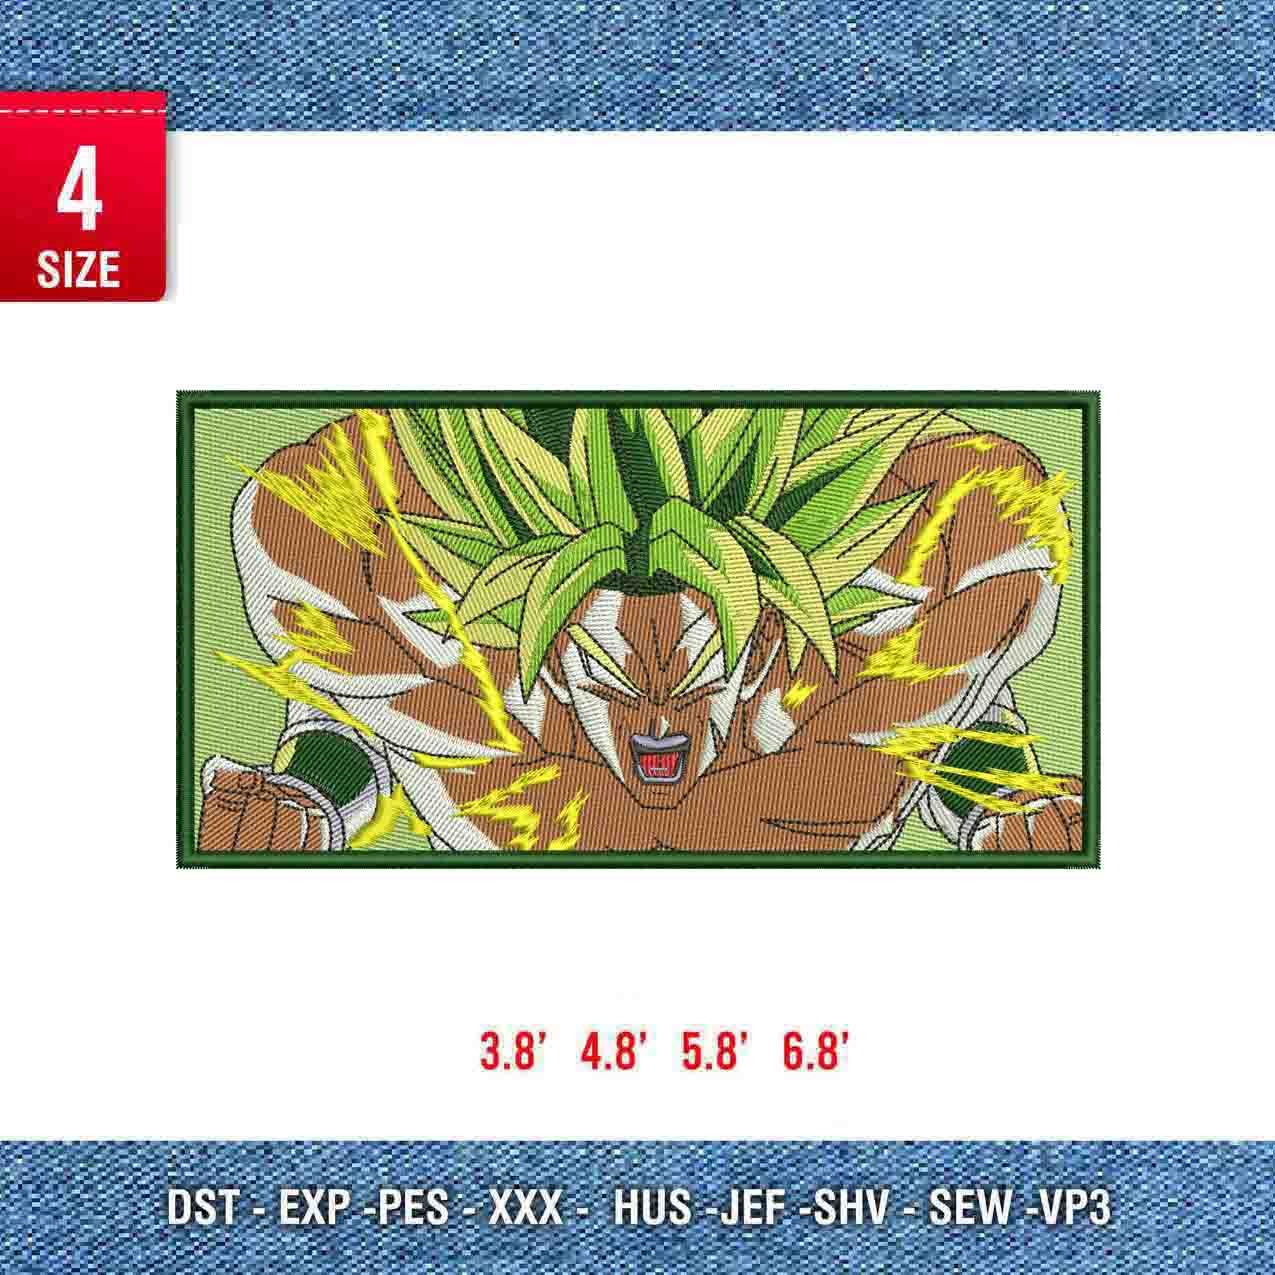 Broly in the box